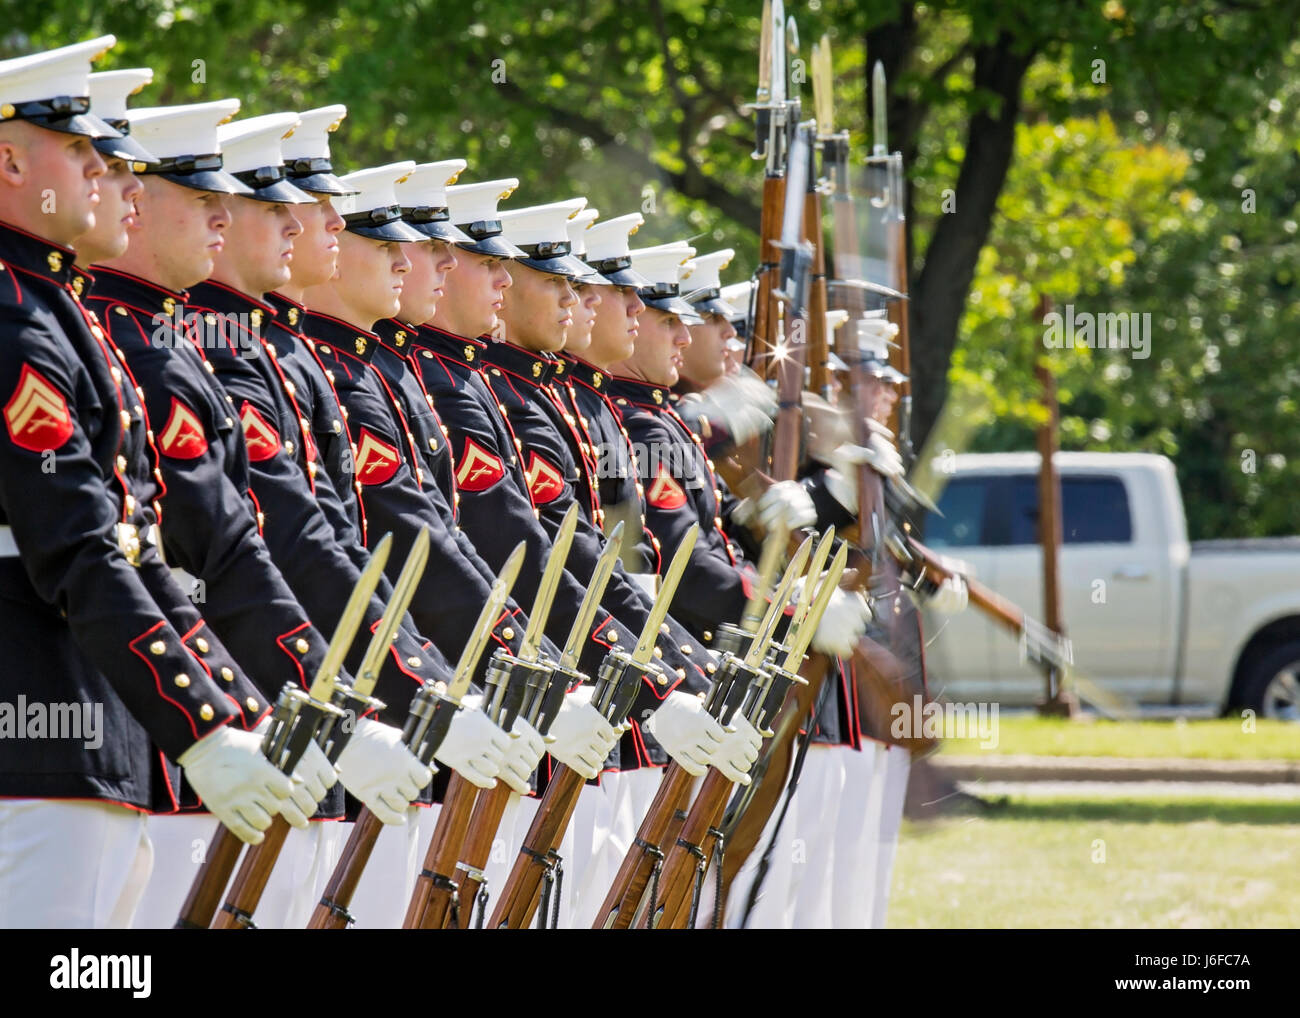 The U.S. Marine Corps Silent Drill Platoon performs during the Centennial Celebration Ceremony at Lejeune Field, Marine Corps Base (MCB) Quantico, Va., May 10, 2017. The event commemorates the founding of MCB Quantico in 1917, and consisted of performances by the U.S. Marine Corps Silent Drill Platoon and the U.S. Marine Drum & Bugle Corps. (U.S. Marine Corps photo by James H. Frank) Stock Photo